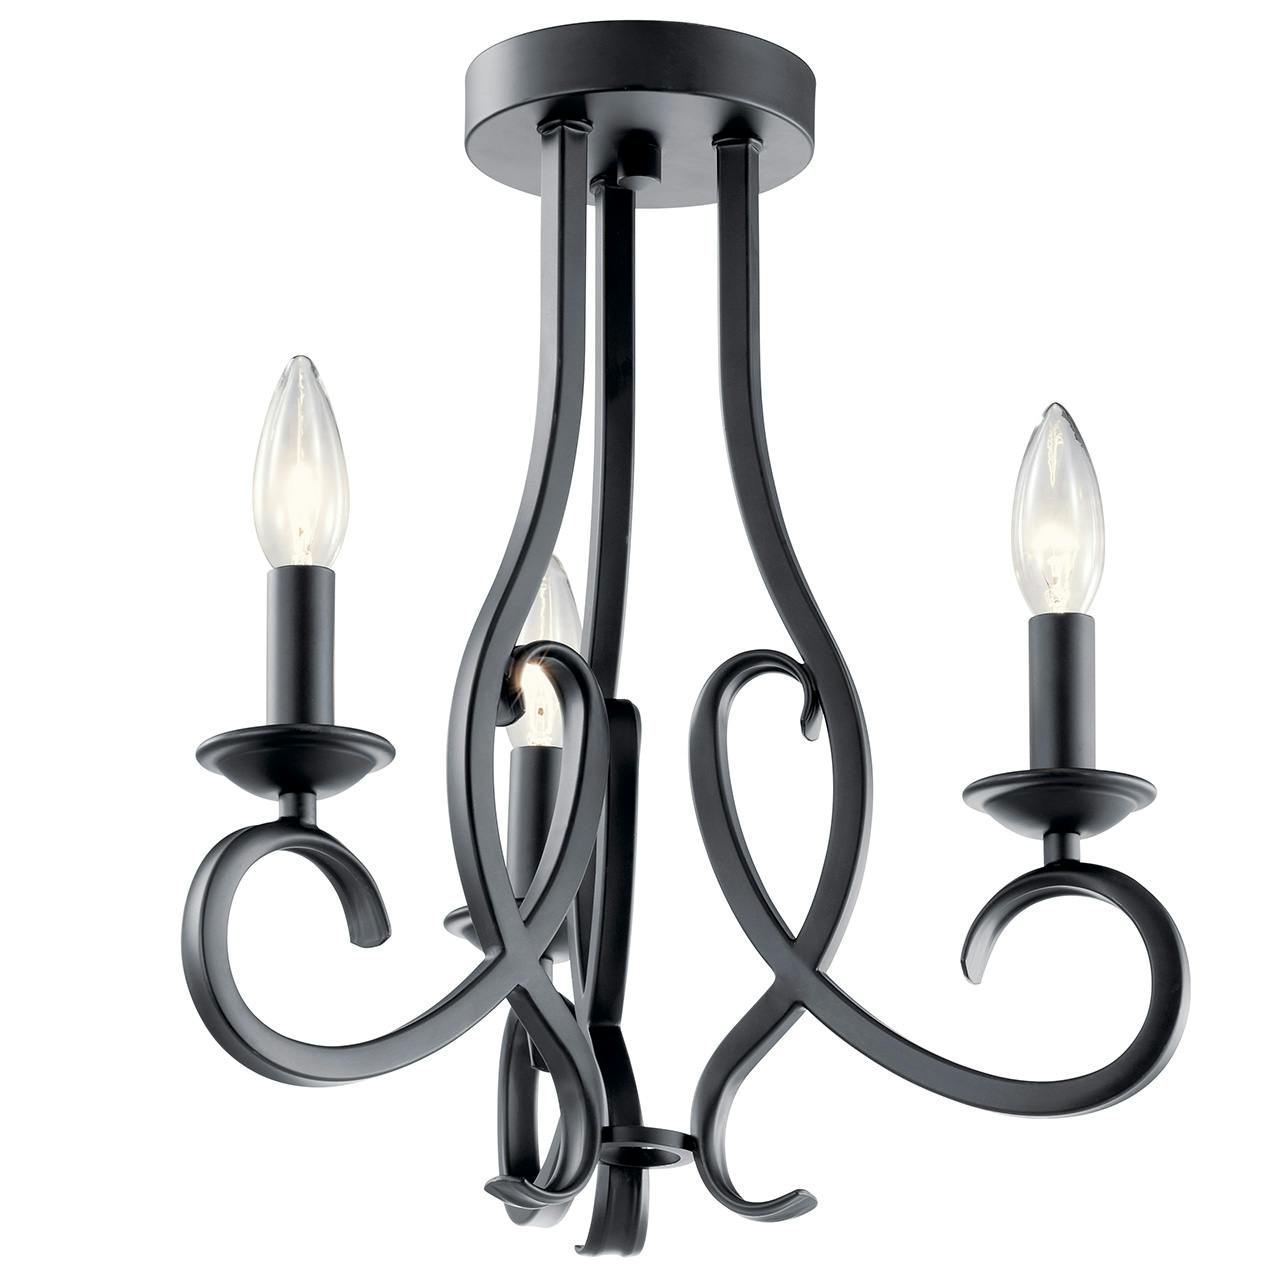 Ania 3 Light Convertible Chandelier Black shown as a semi-flush on a white background